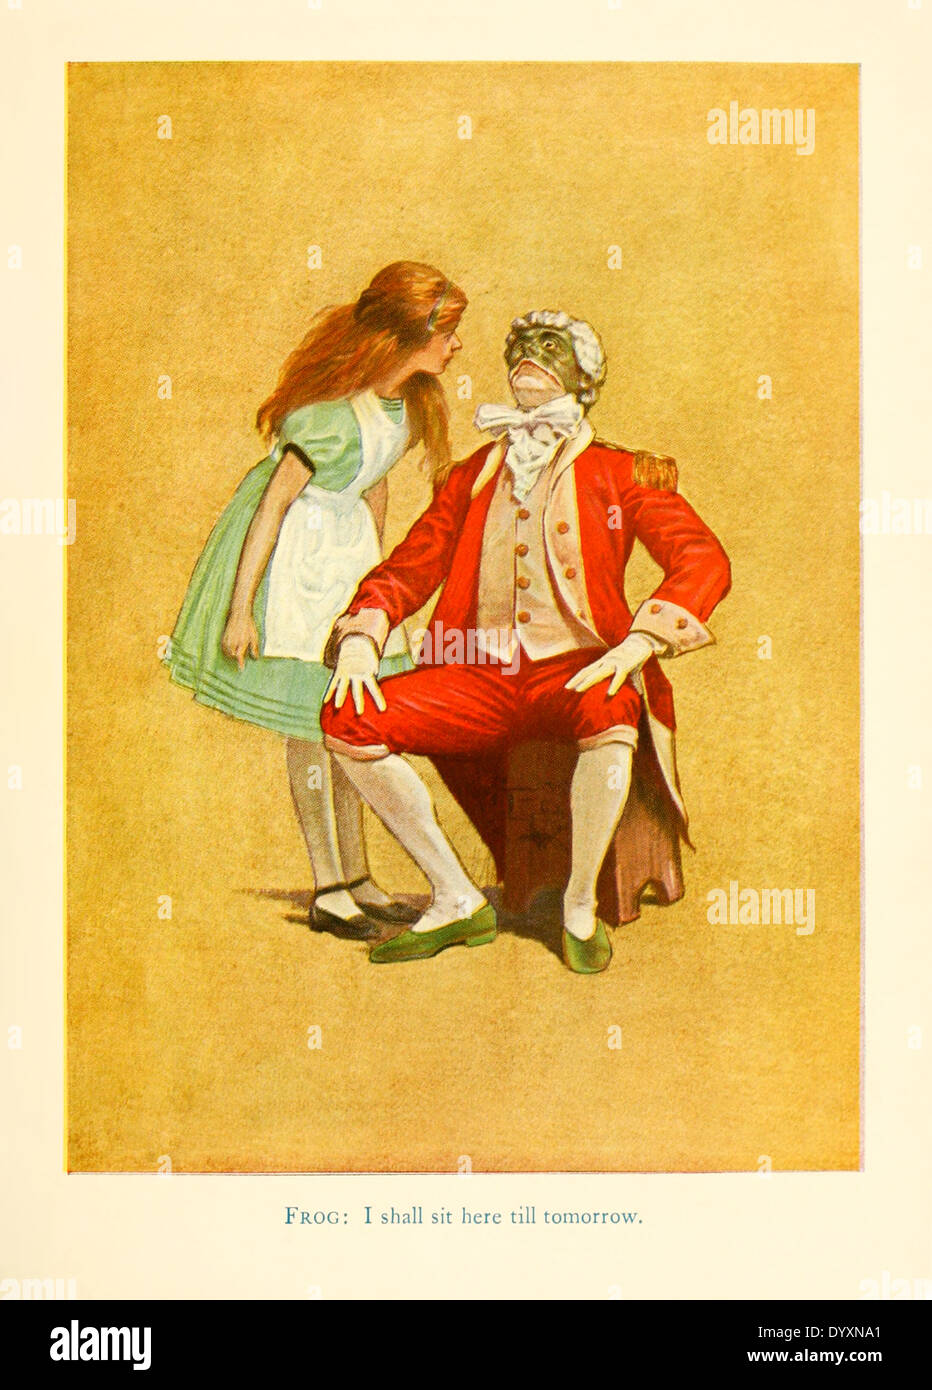 Alice and the Frog Footman, from for the 1915 stage adaptation of 'Alice in Wonderland' by Lewis Carroll, illustration by James Allen St. John (1872-1957). See description for more information. Stock Photo